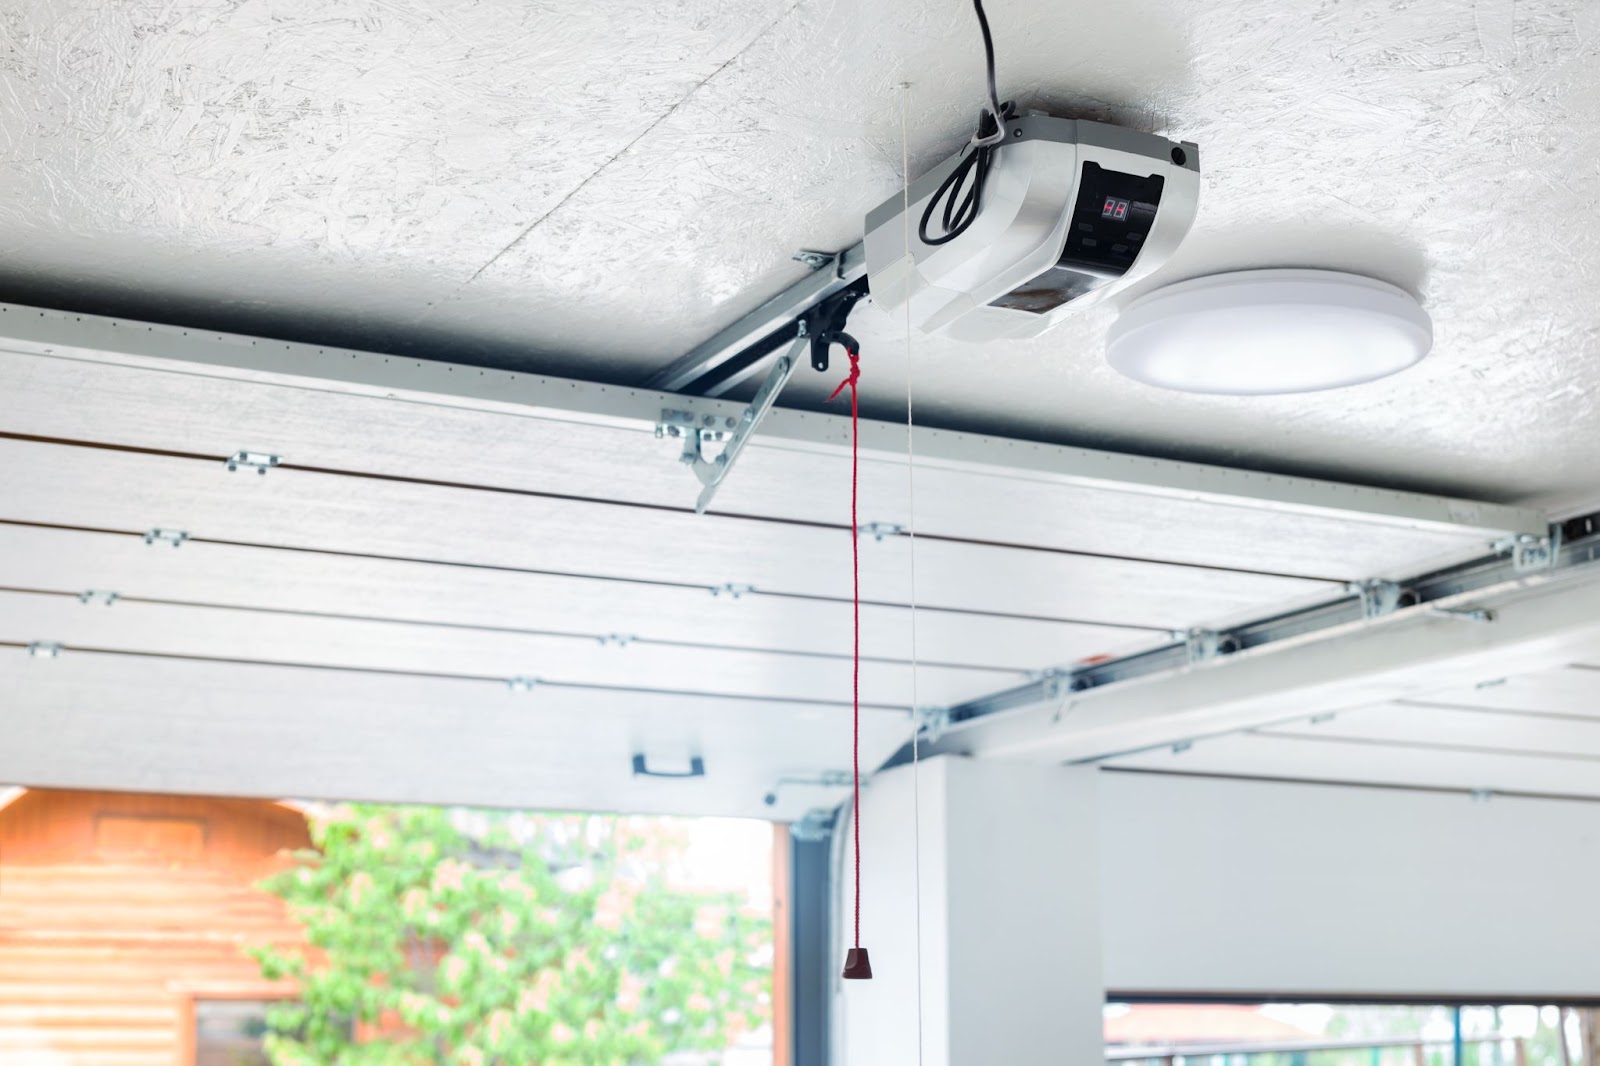 Learn how to pick the best garage door opener with our easy-to-follow guide. Get everything you need to know about selecting an opener!